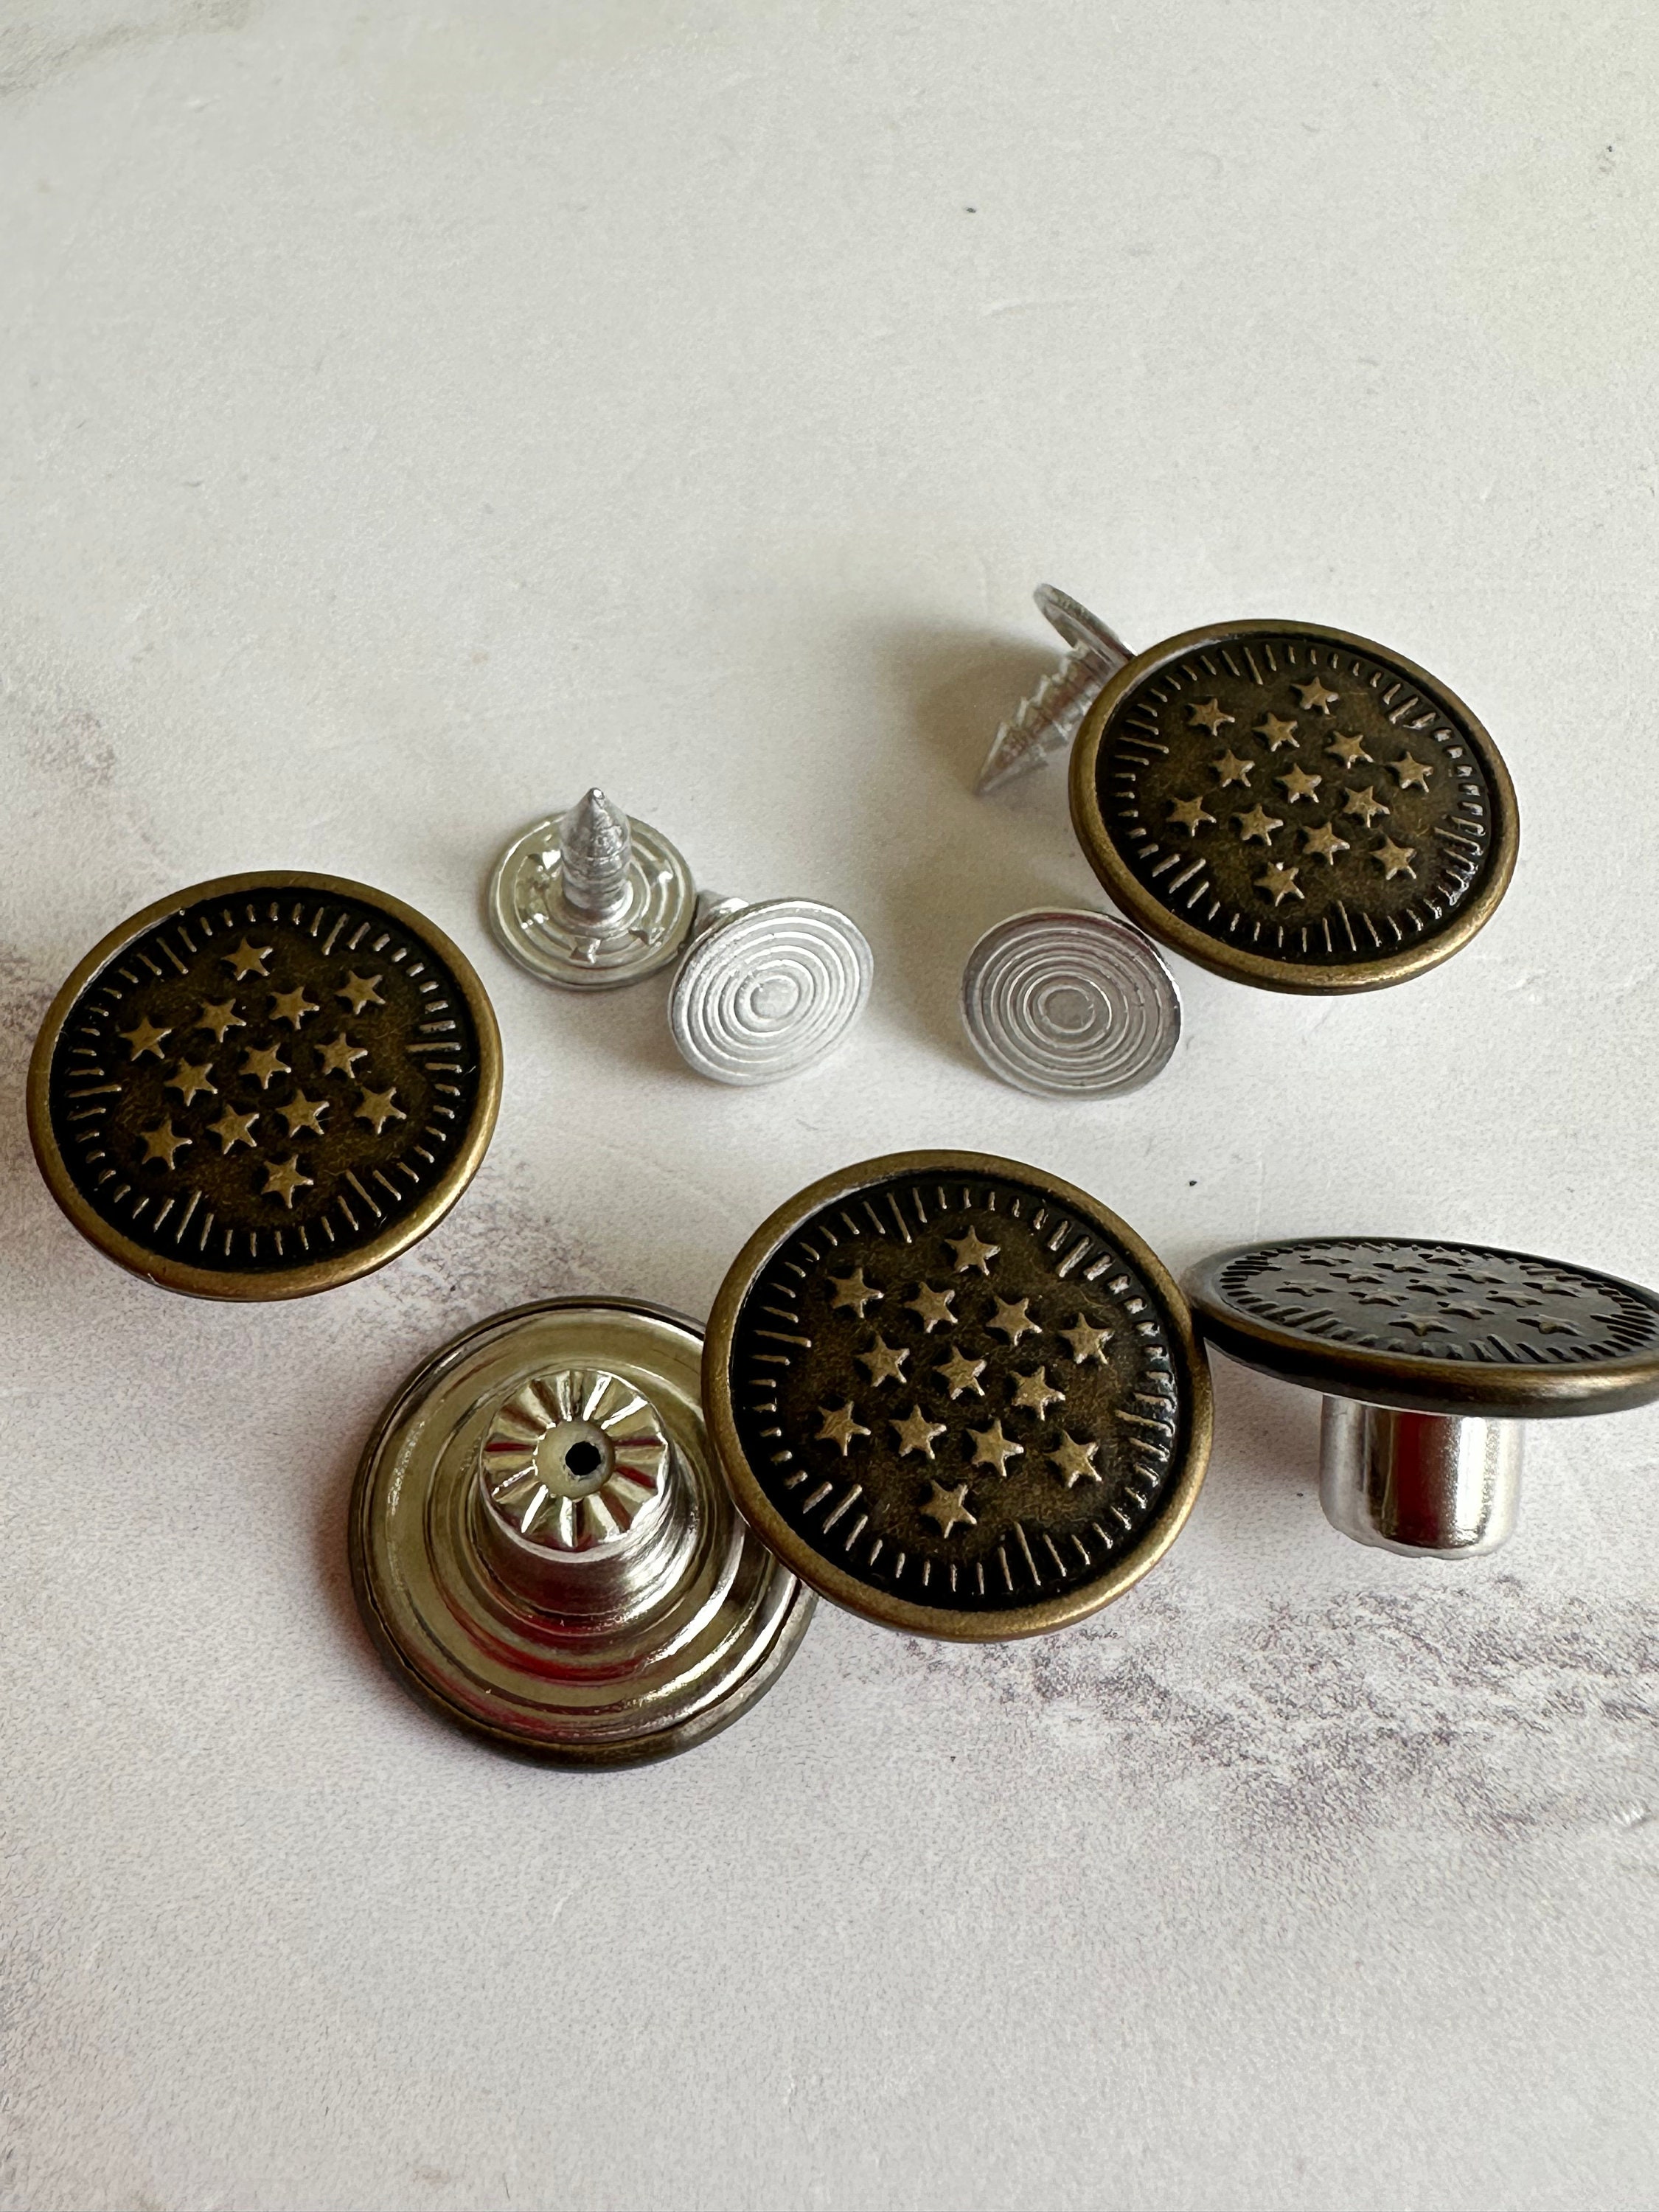 15 Tack Buttons, Copper Tone Metal, 17mm, Star Bullseye, Jean Jacket Type, No  Sew, Suspender Buttons 